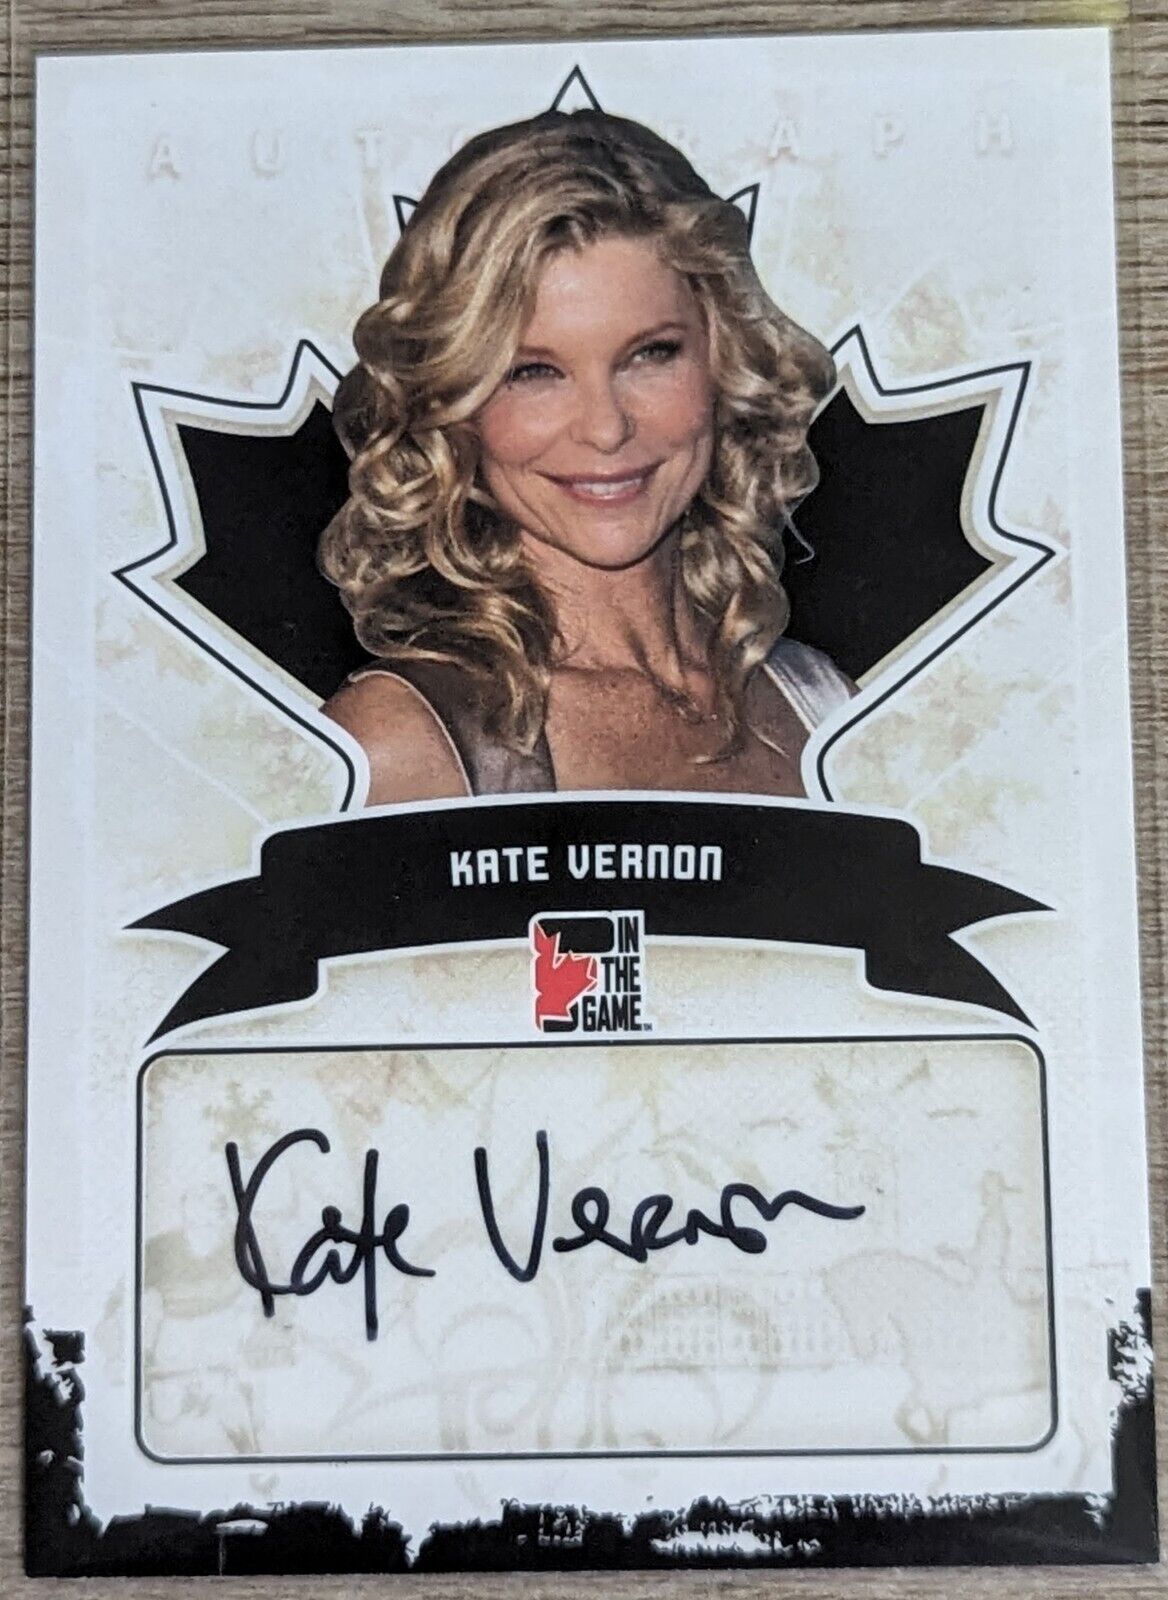 2011 In The Game Autograph Card Kate Vernon A-KV1